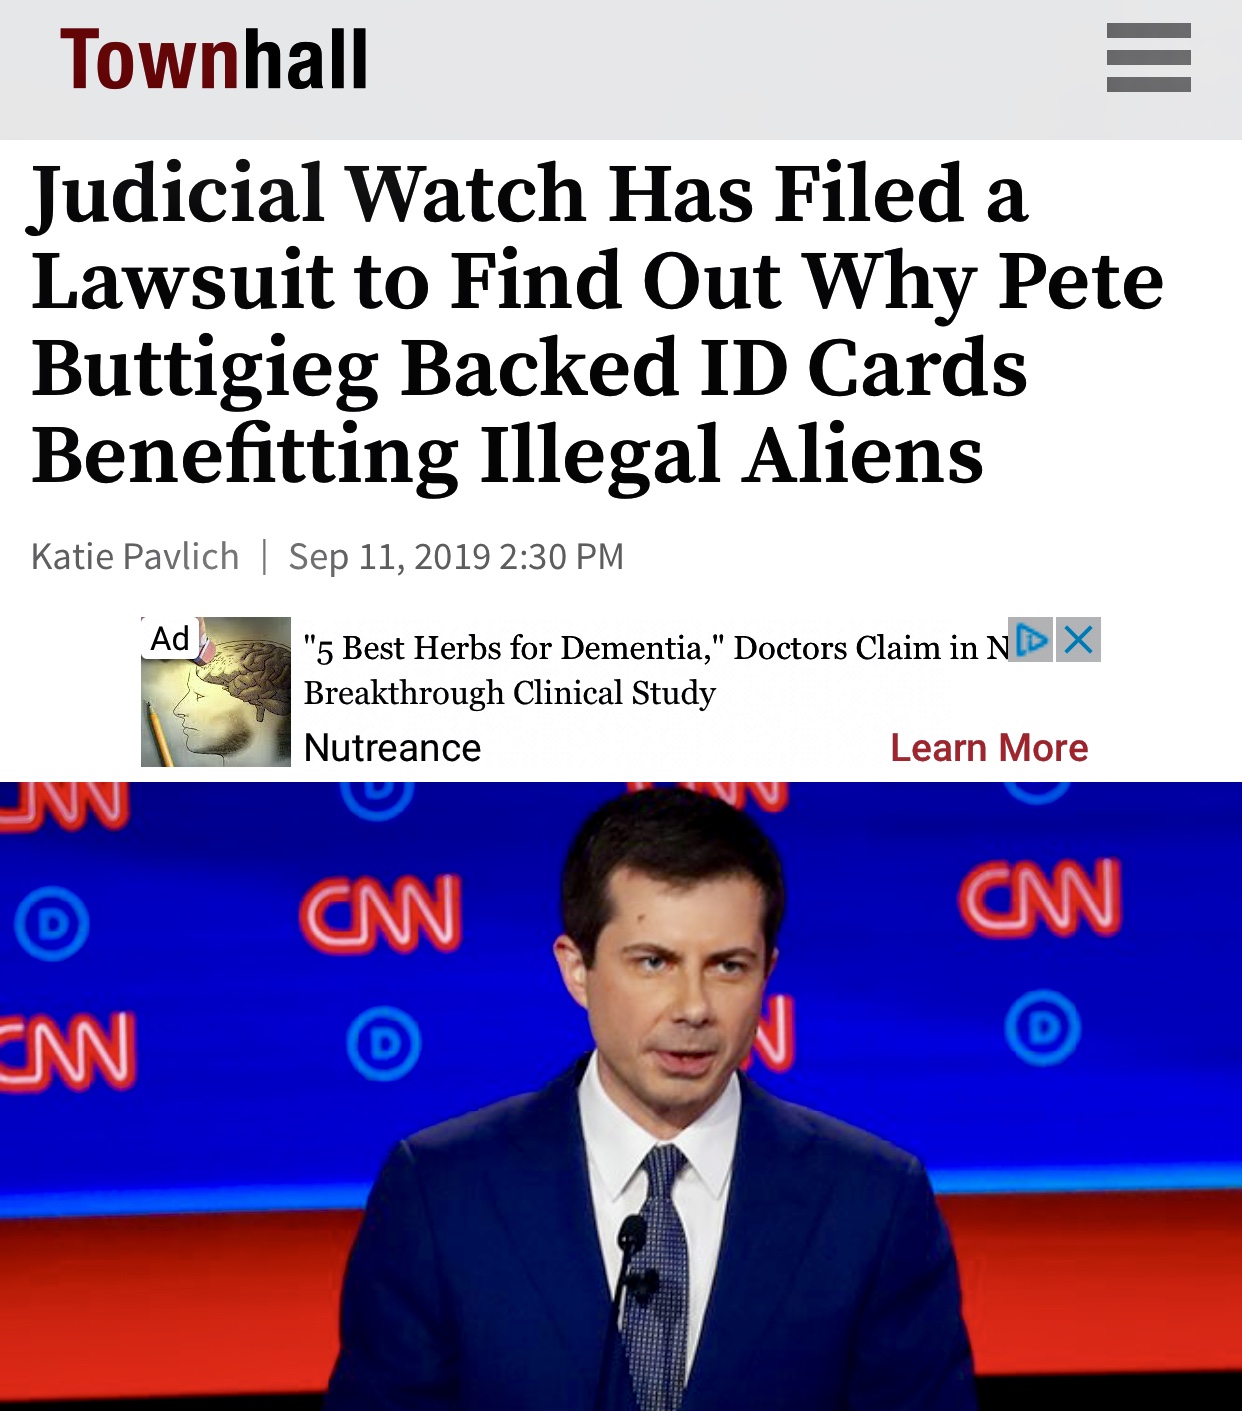 Judicial Watch Has Filed a Lawsuit to Find Out Why Pete Buttigieg Backed ID Cards Benefitting Illegal Aliens